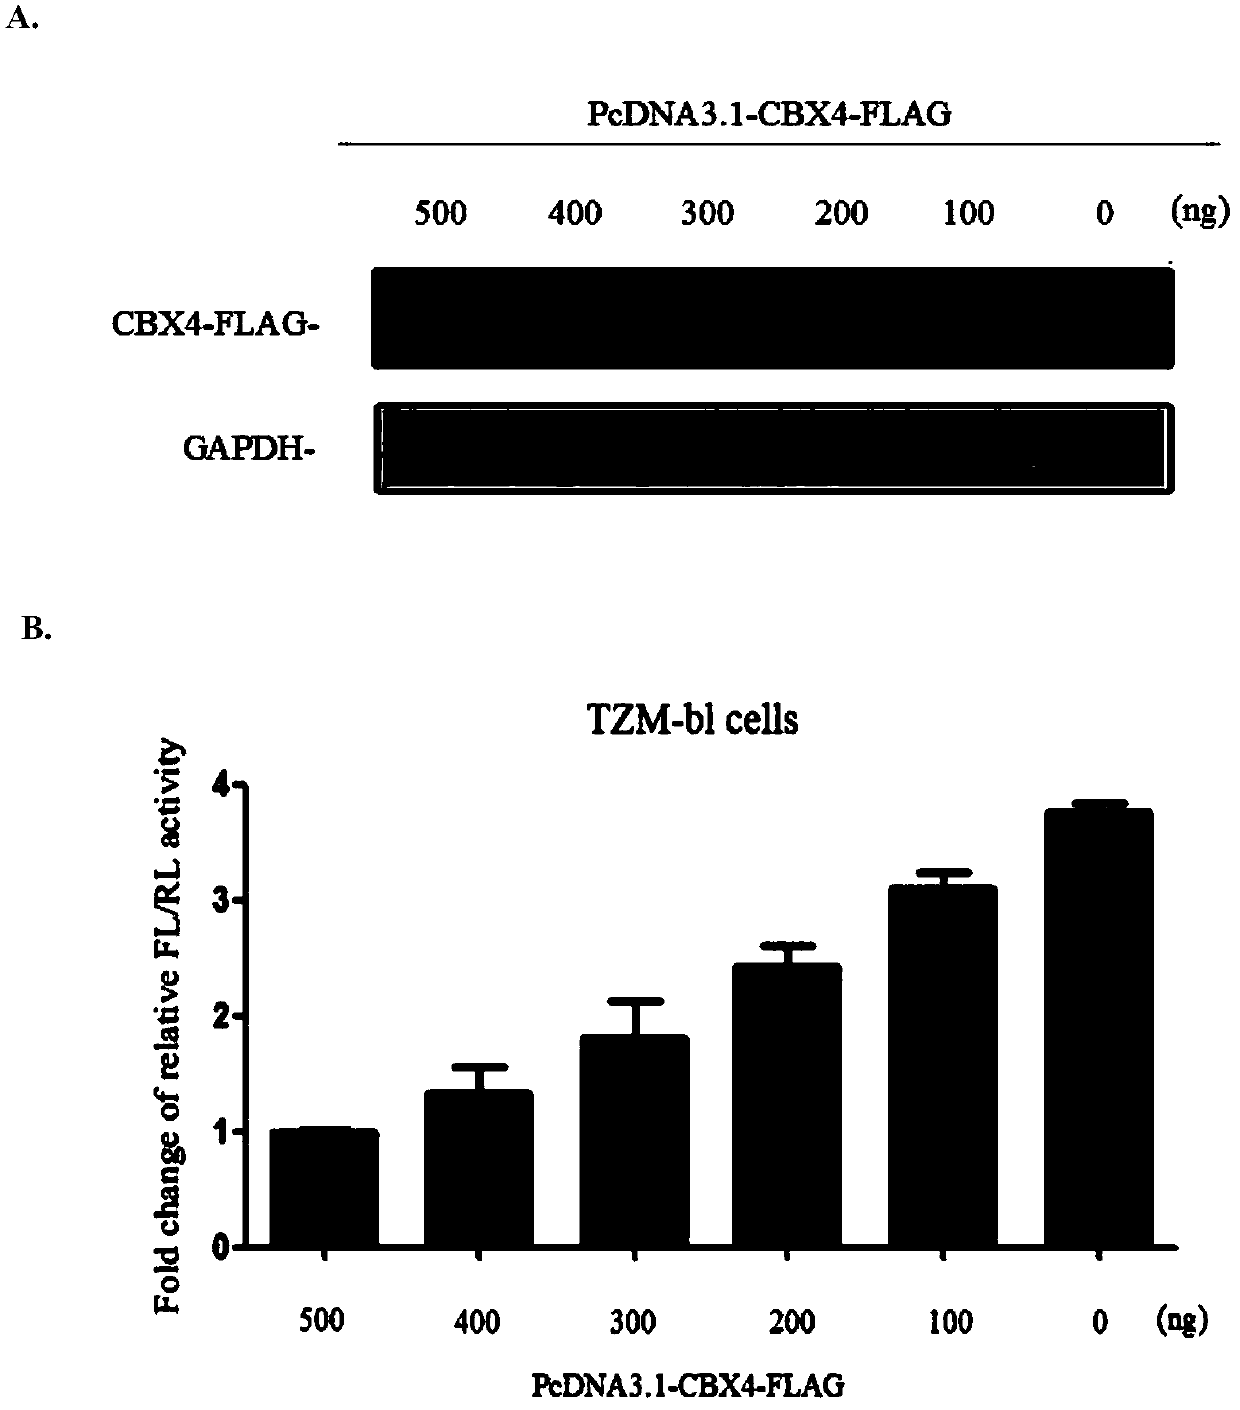 Application of CBX4 used as HIV-1 latent infection activation target